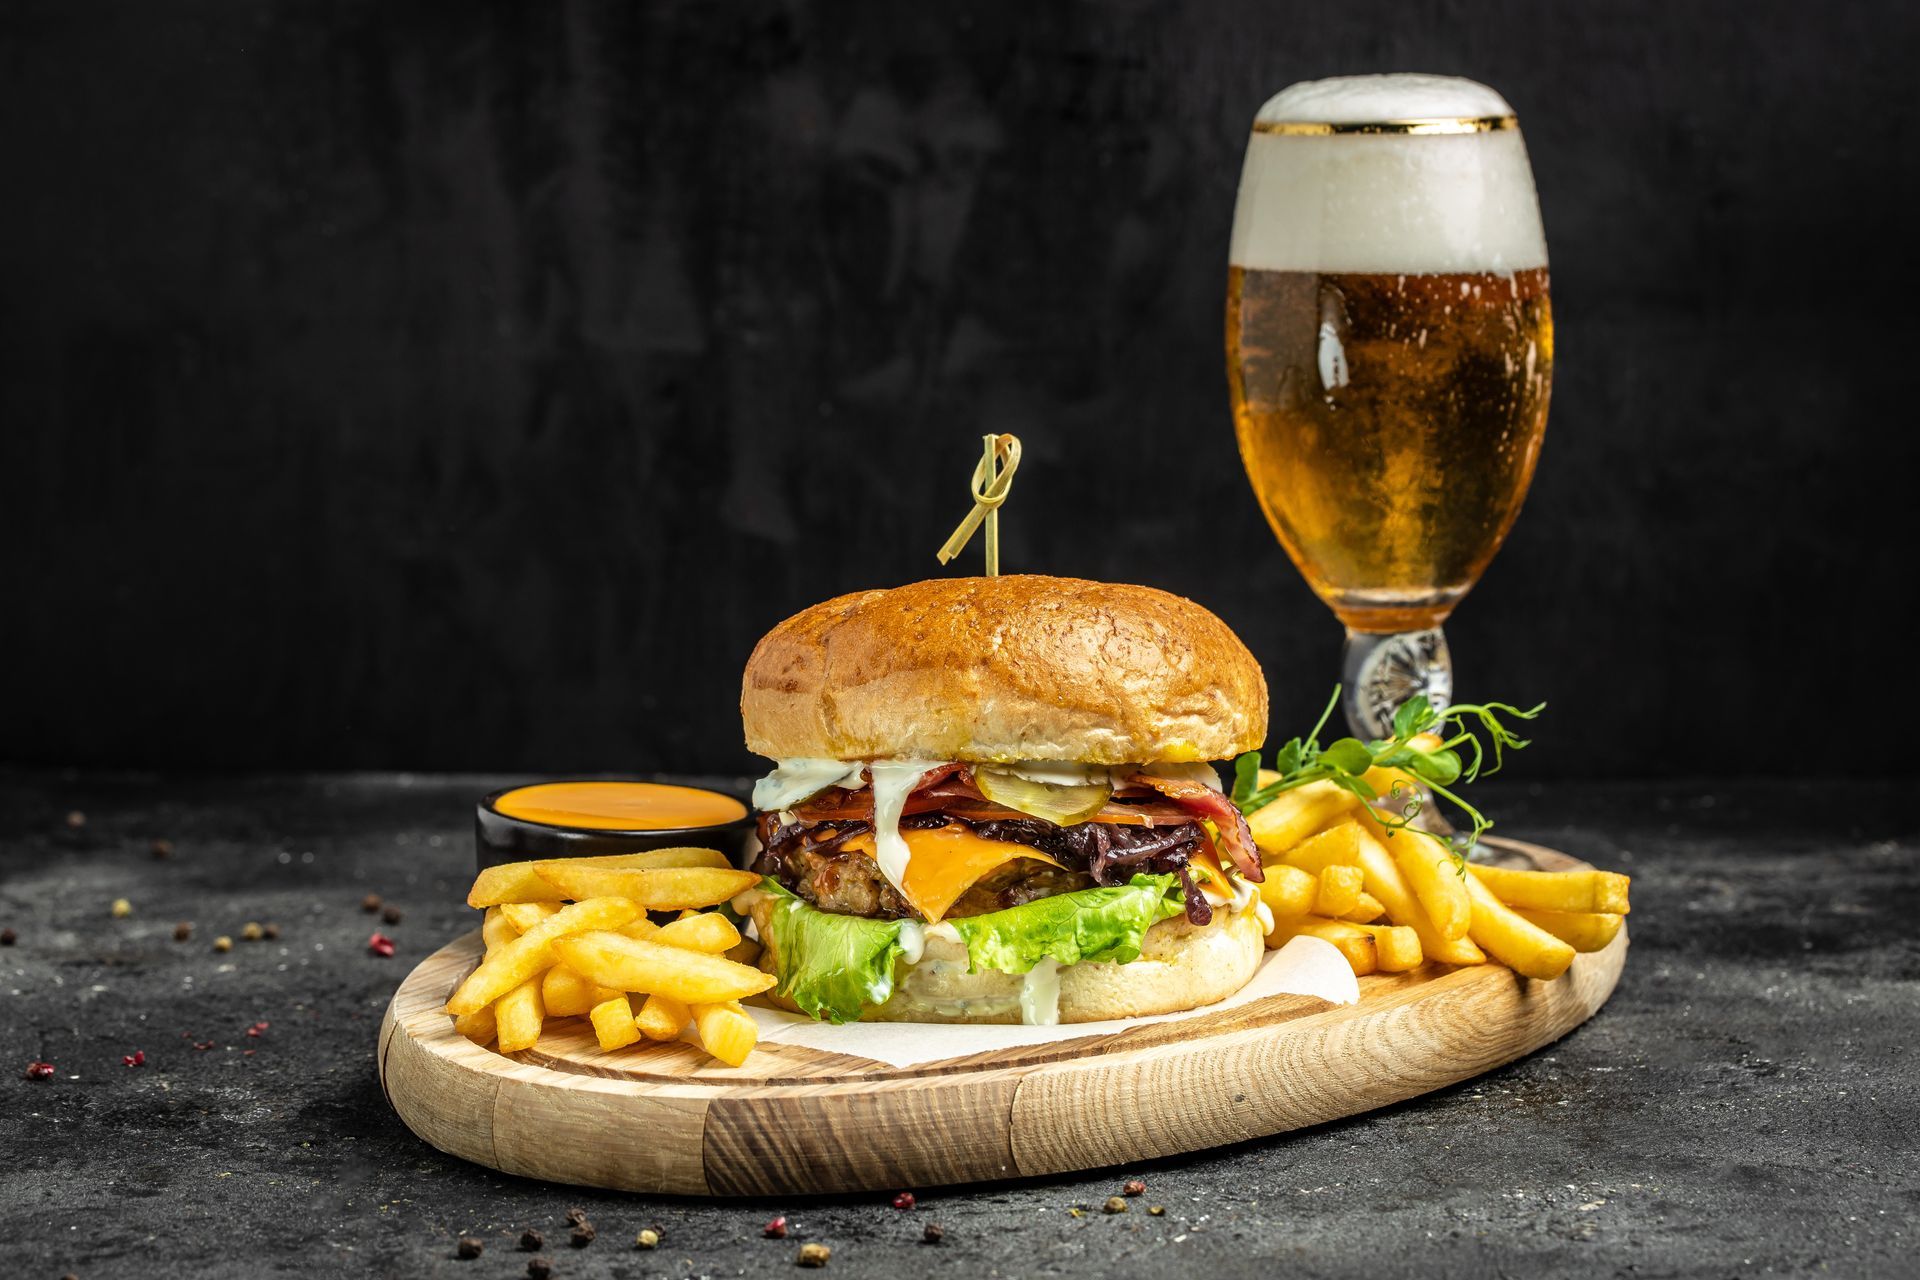 a hamburger and french fries on a wooden cutting board next to a glass of beer .